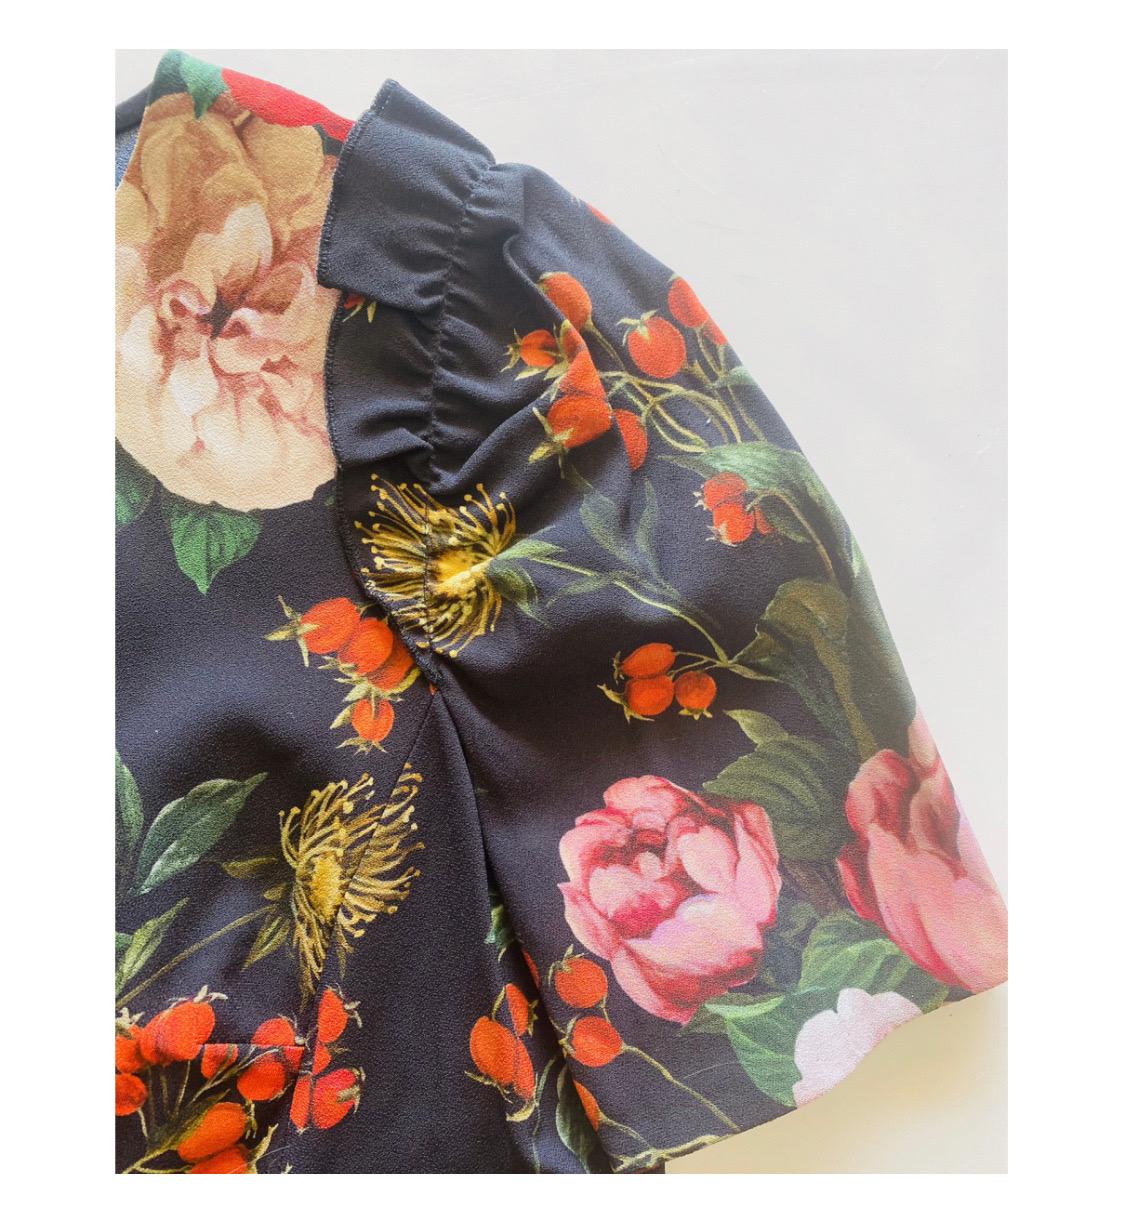 Dolce & Gabbana Floral printed top
blouse

Size 40IT, UK8, S.

Viscose / Elasthan

Brand new with tags!

Please check my other DG clothing &

accessories!
